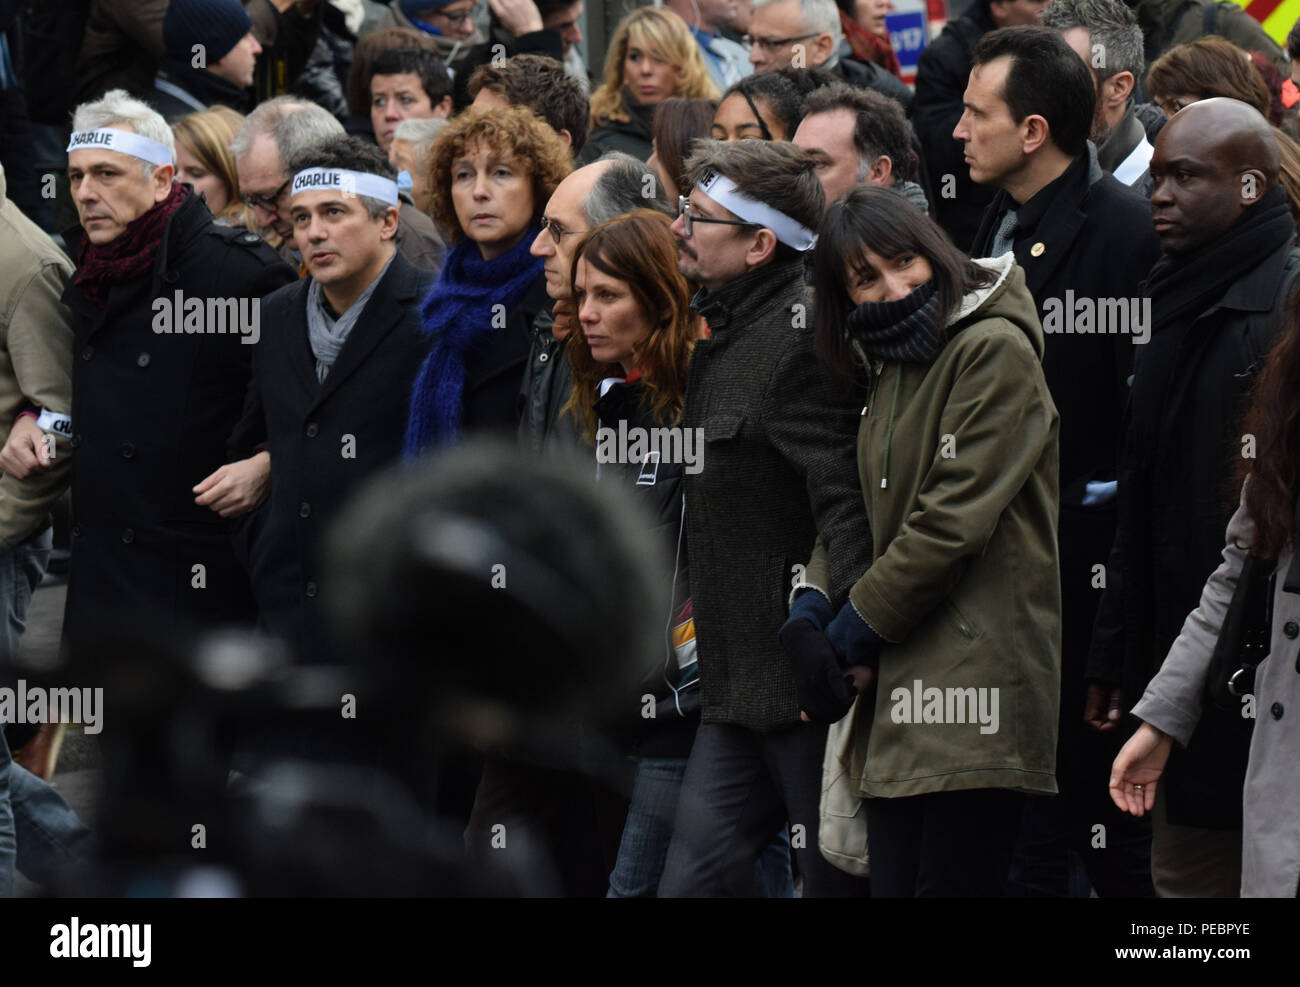 January 11, 2015 - Paris, France:  Family members and close friends of Charlie Hebdo victims, including senior cartoonist Renaud Luzier (known as 'Luz'), attend a mass unity rally following the recent Paris terrorist attacks.  Four million people demonstrated across the country in a 'Marche Republicaine' (Republican March) celebrating the nation's unity in face of terrorist threats. Thousands of people had banners or cartoons referring to Charlie Hebdo, the satirical magazine whose office was targeted by Islamist gunmen earlier in the week.  La grande marche republicaine en hommage aux victime Stock Photo